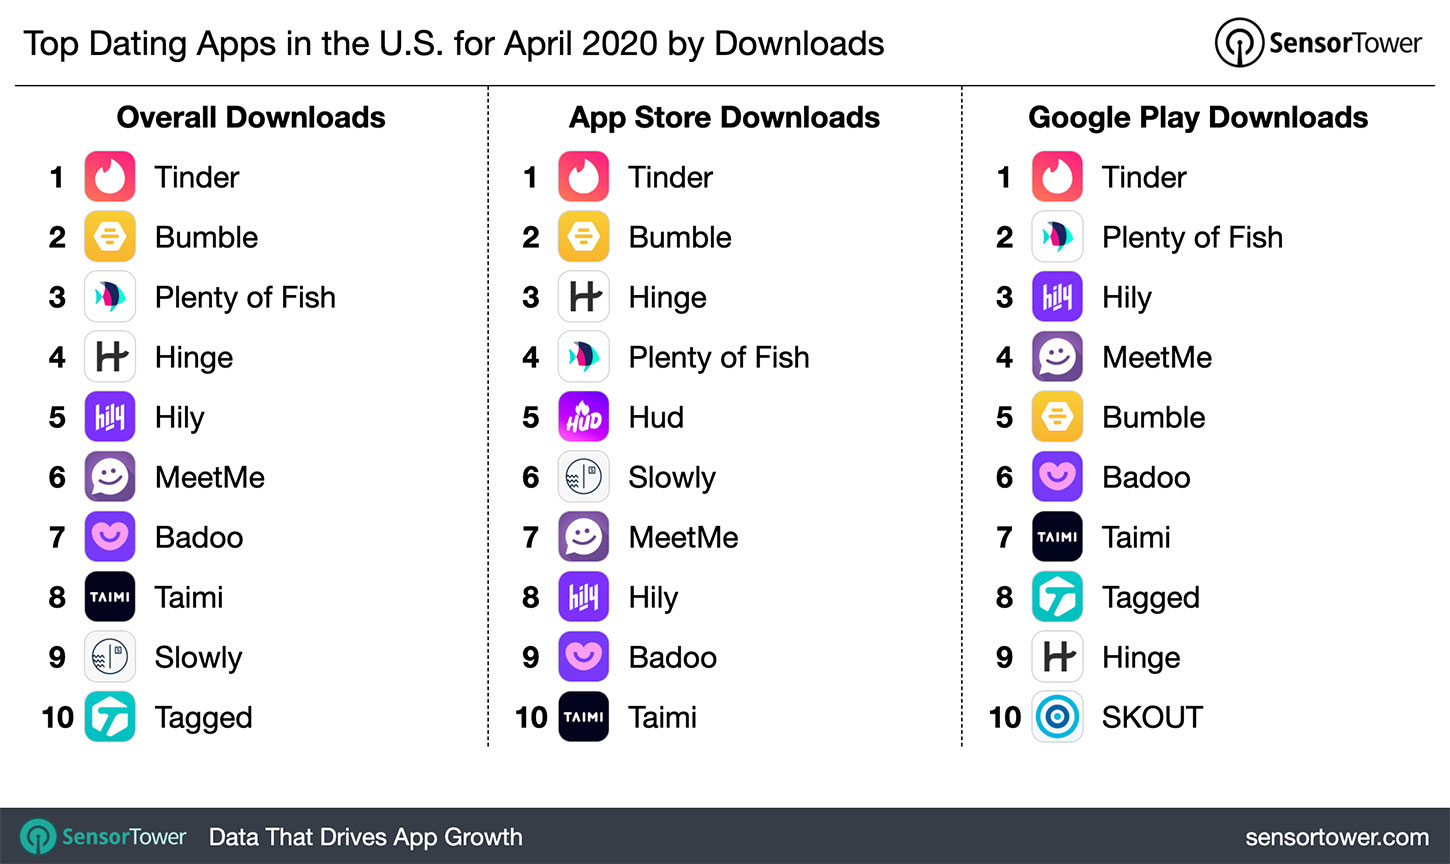 Top Dating Apps in the U.S. for April 2020 by Downloads